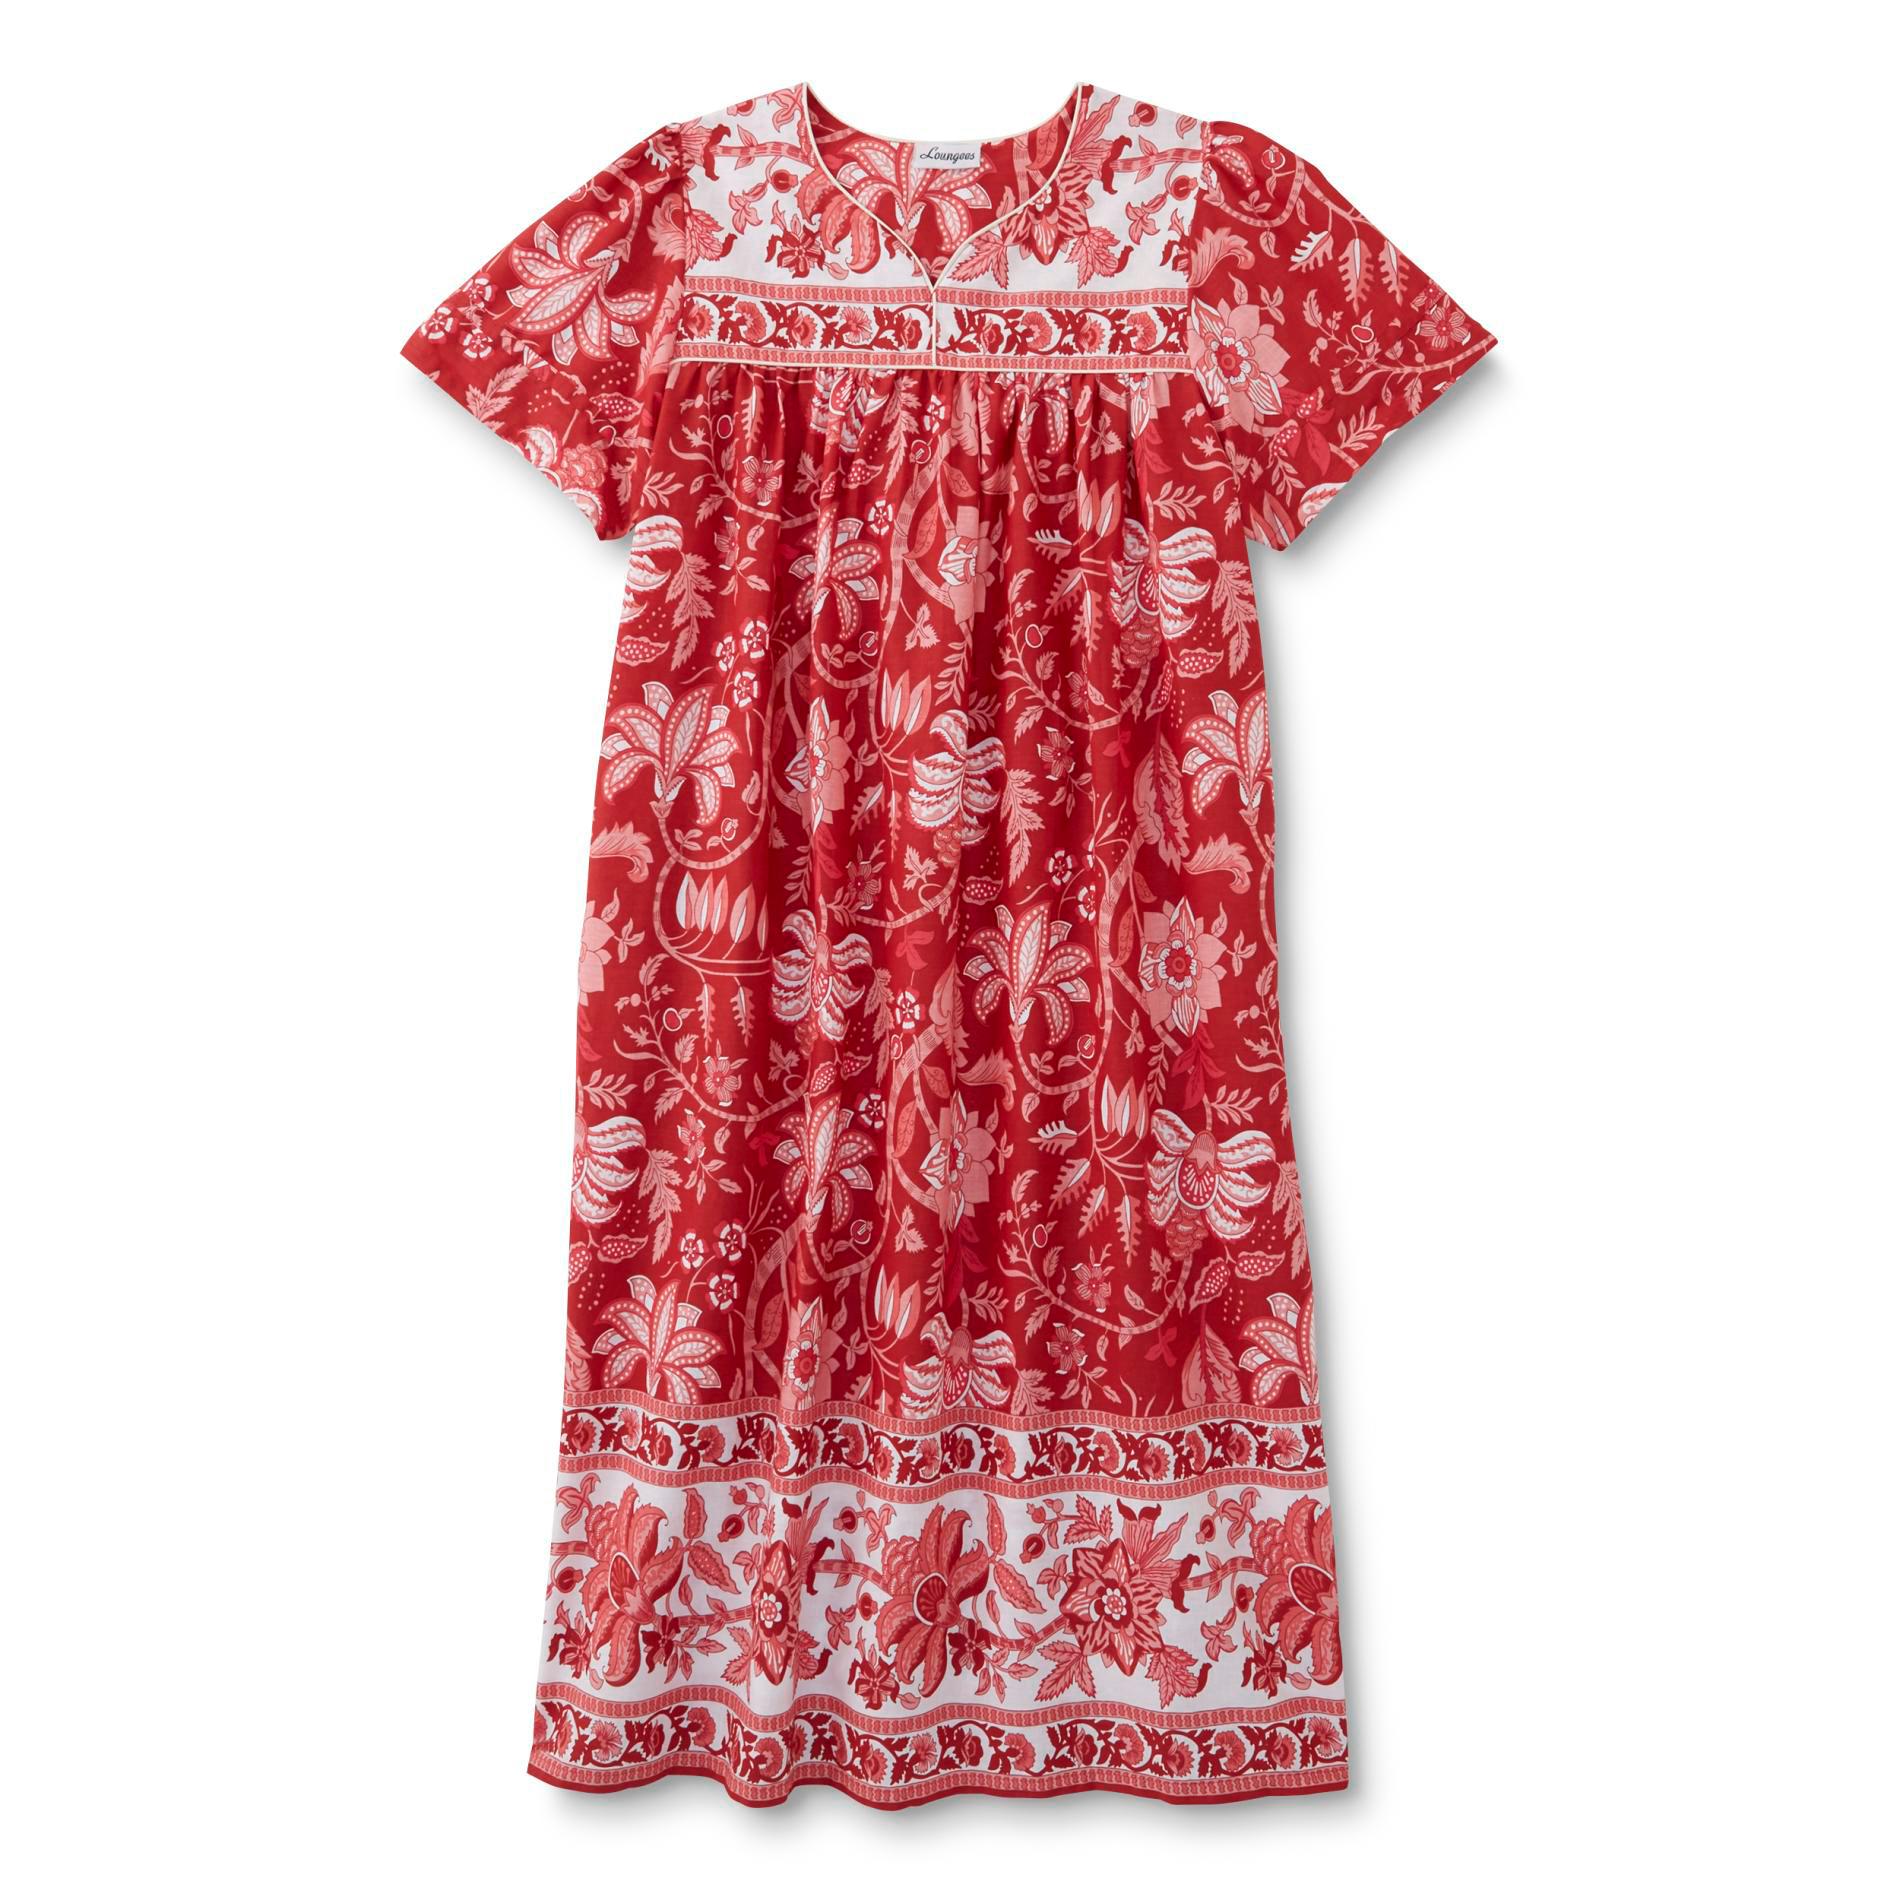 Loungees Women's Plus Nightgown - Floral